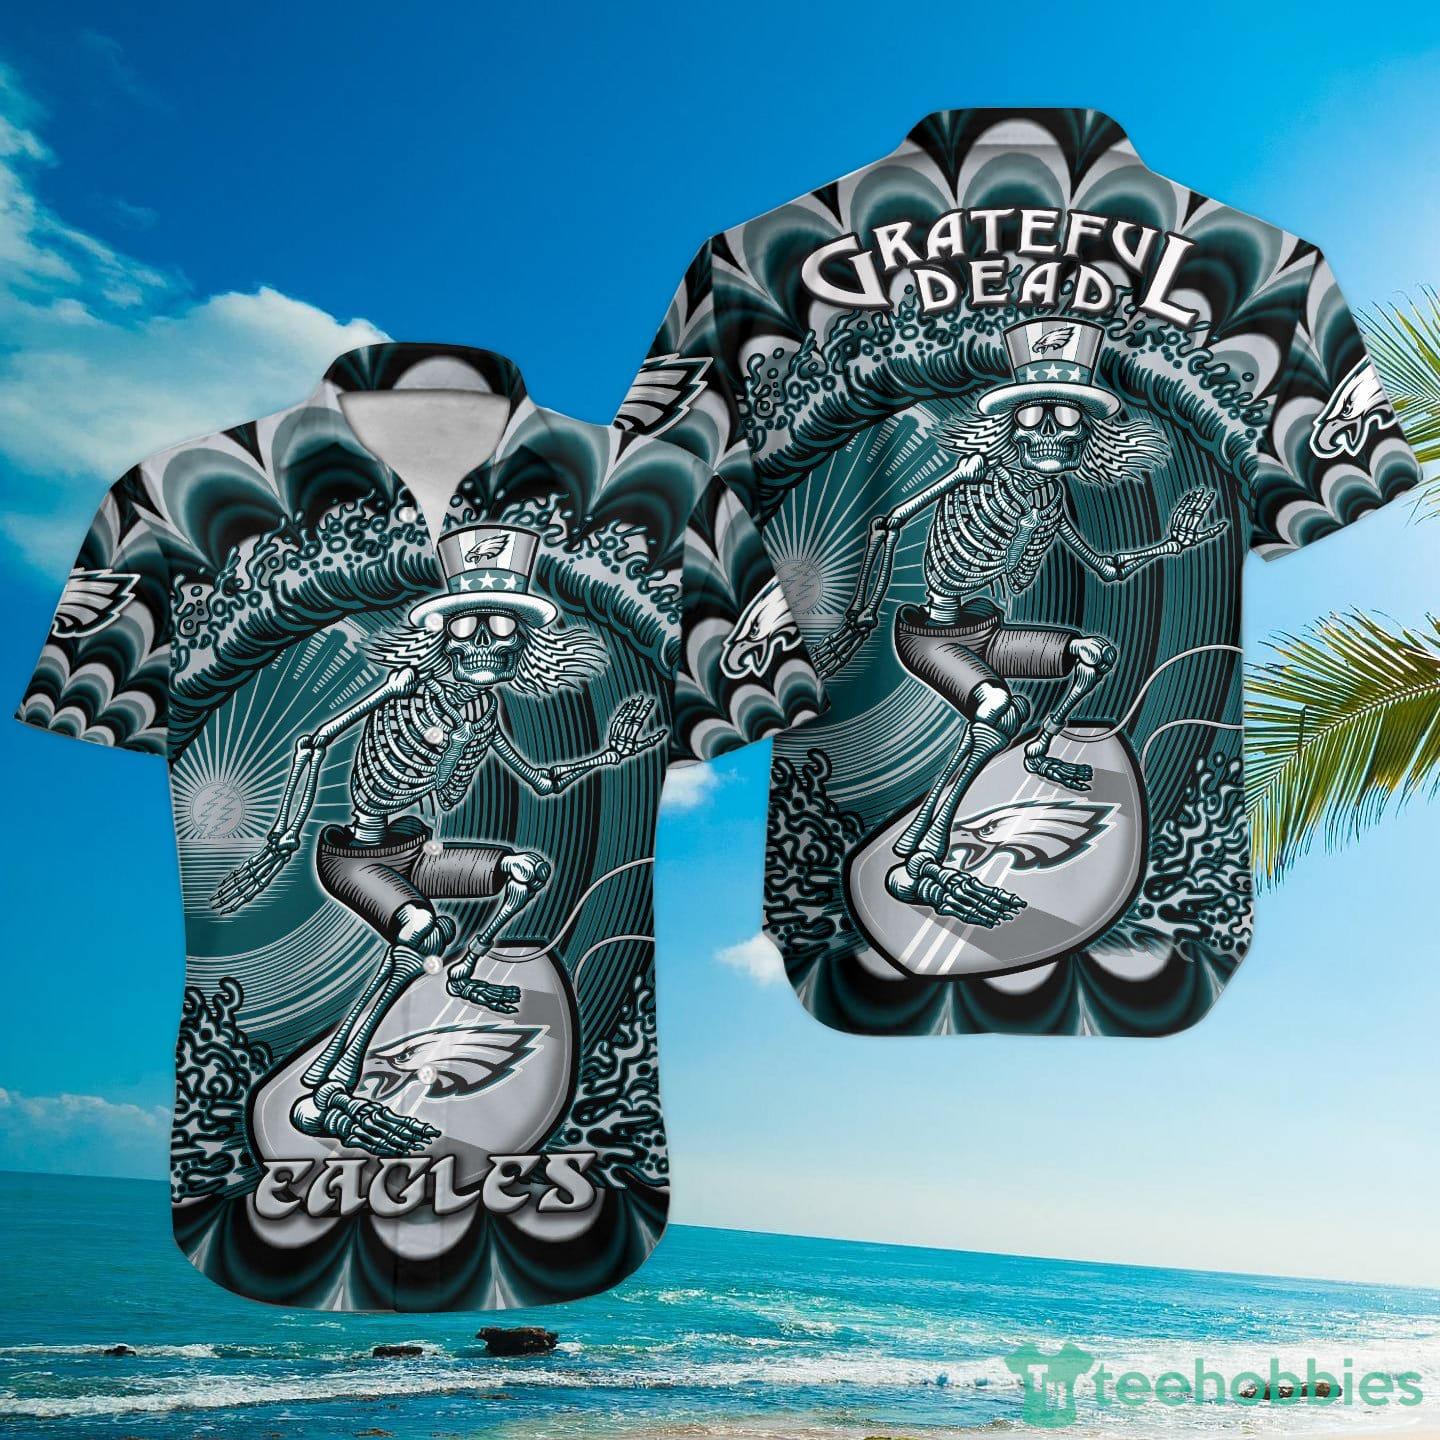 Philadelphia Eagles Hawaiian Shirt Snoopy Cool Gift For Family Customer  Support Team - Family Gift Ideas That Everyone Will Enjoy